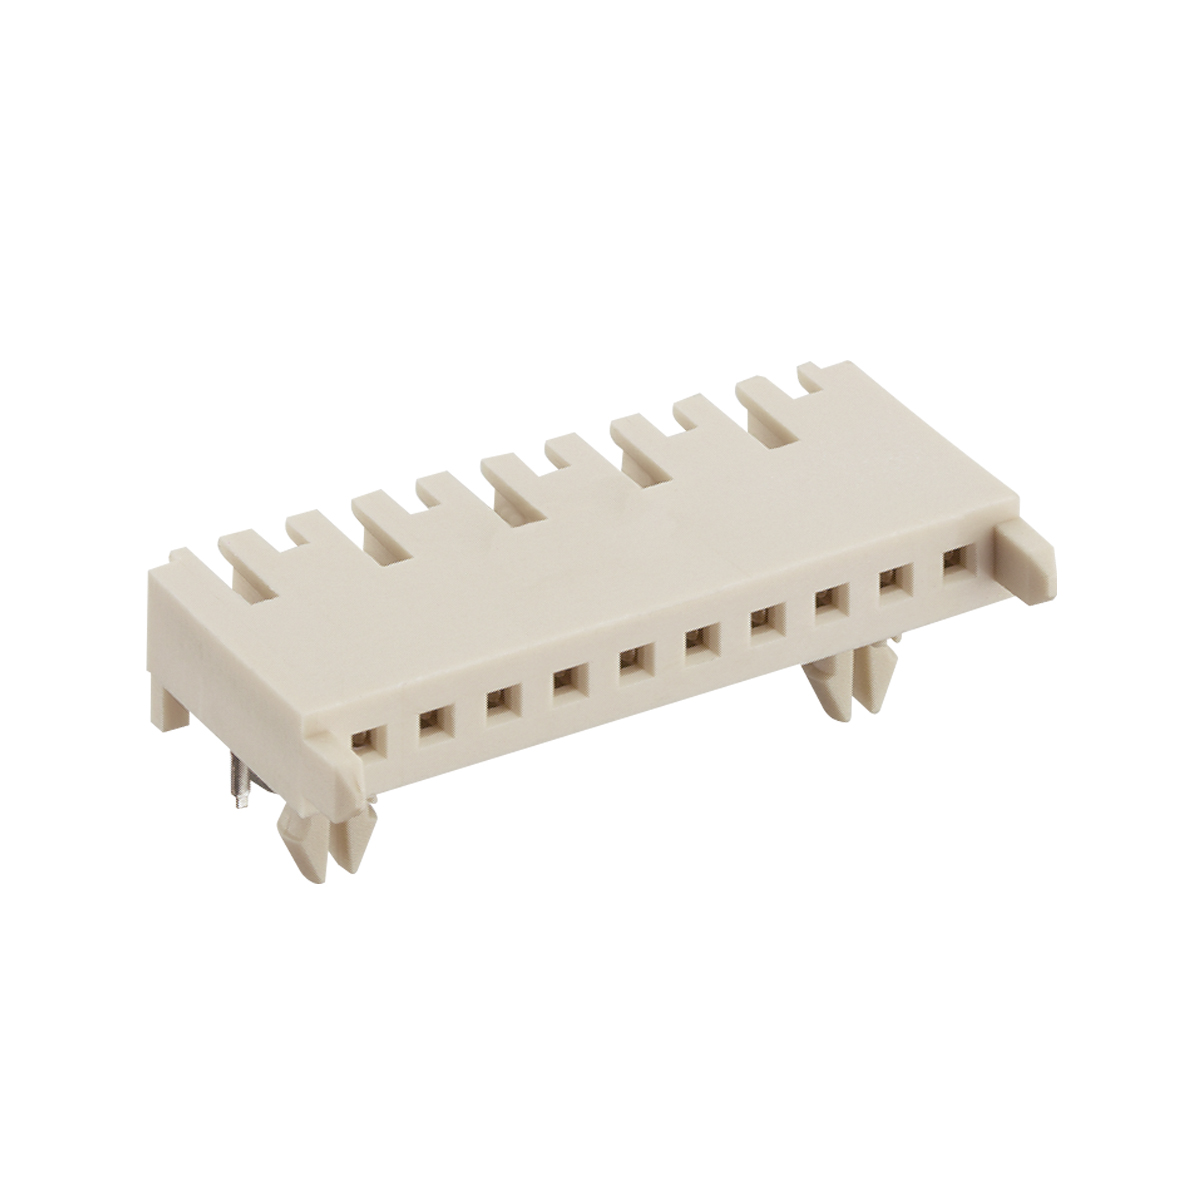 Lumberg: 3800 (Series 38 | Multimodul™ connectors, pitch 2.5 mm)